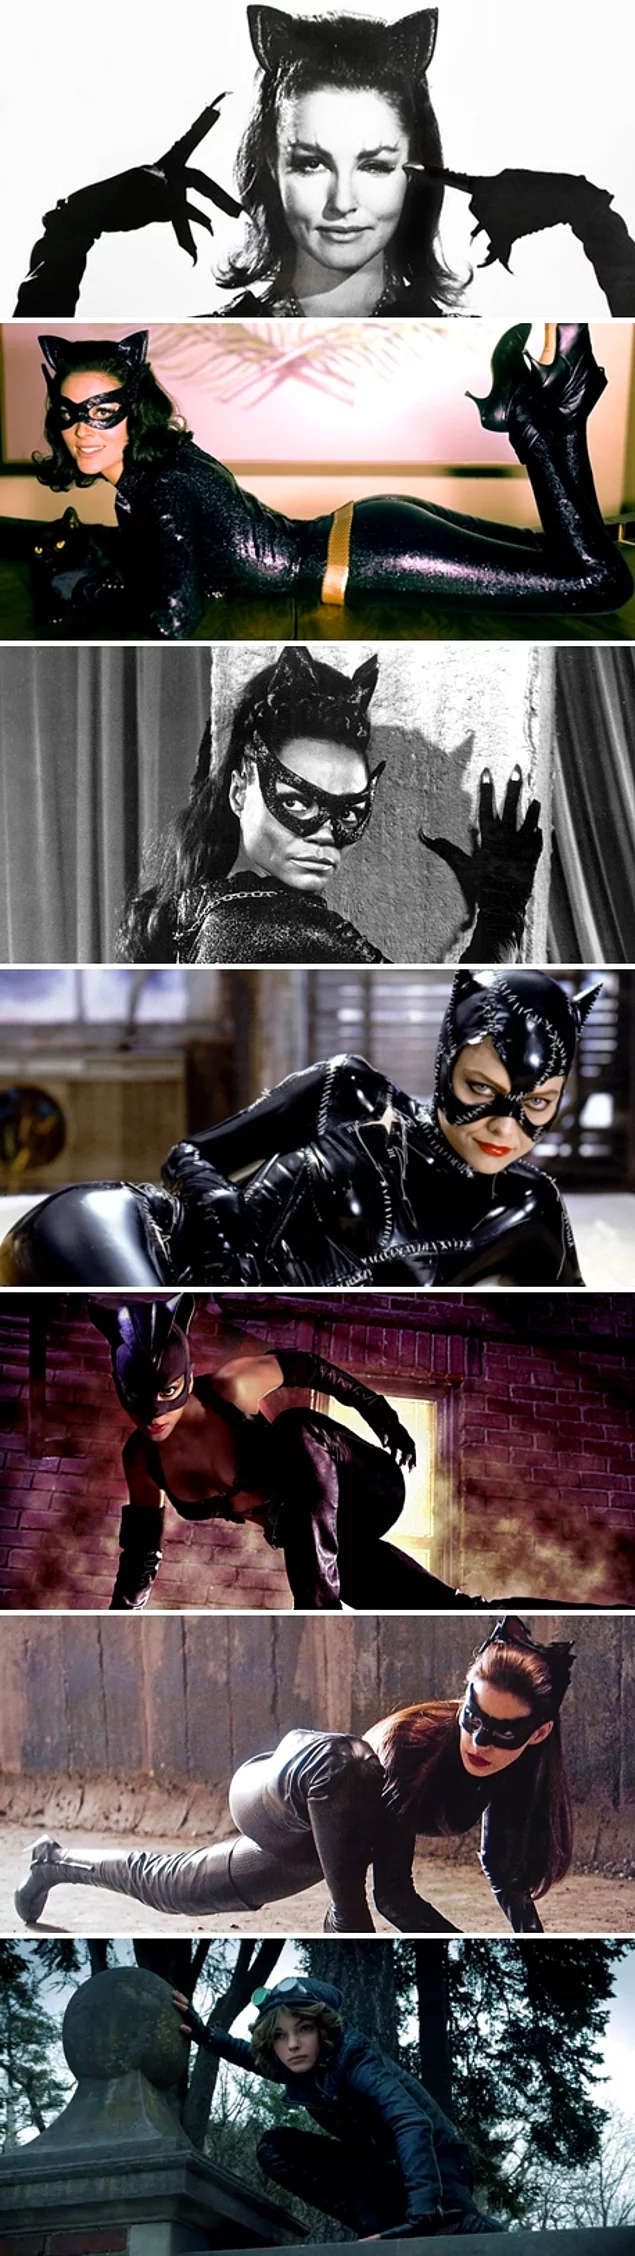 Selina Kyle AKA Catwoman was also played by many actresses